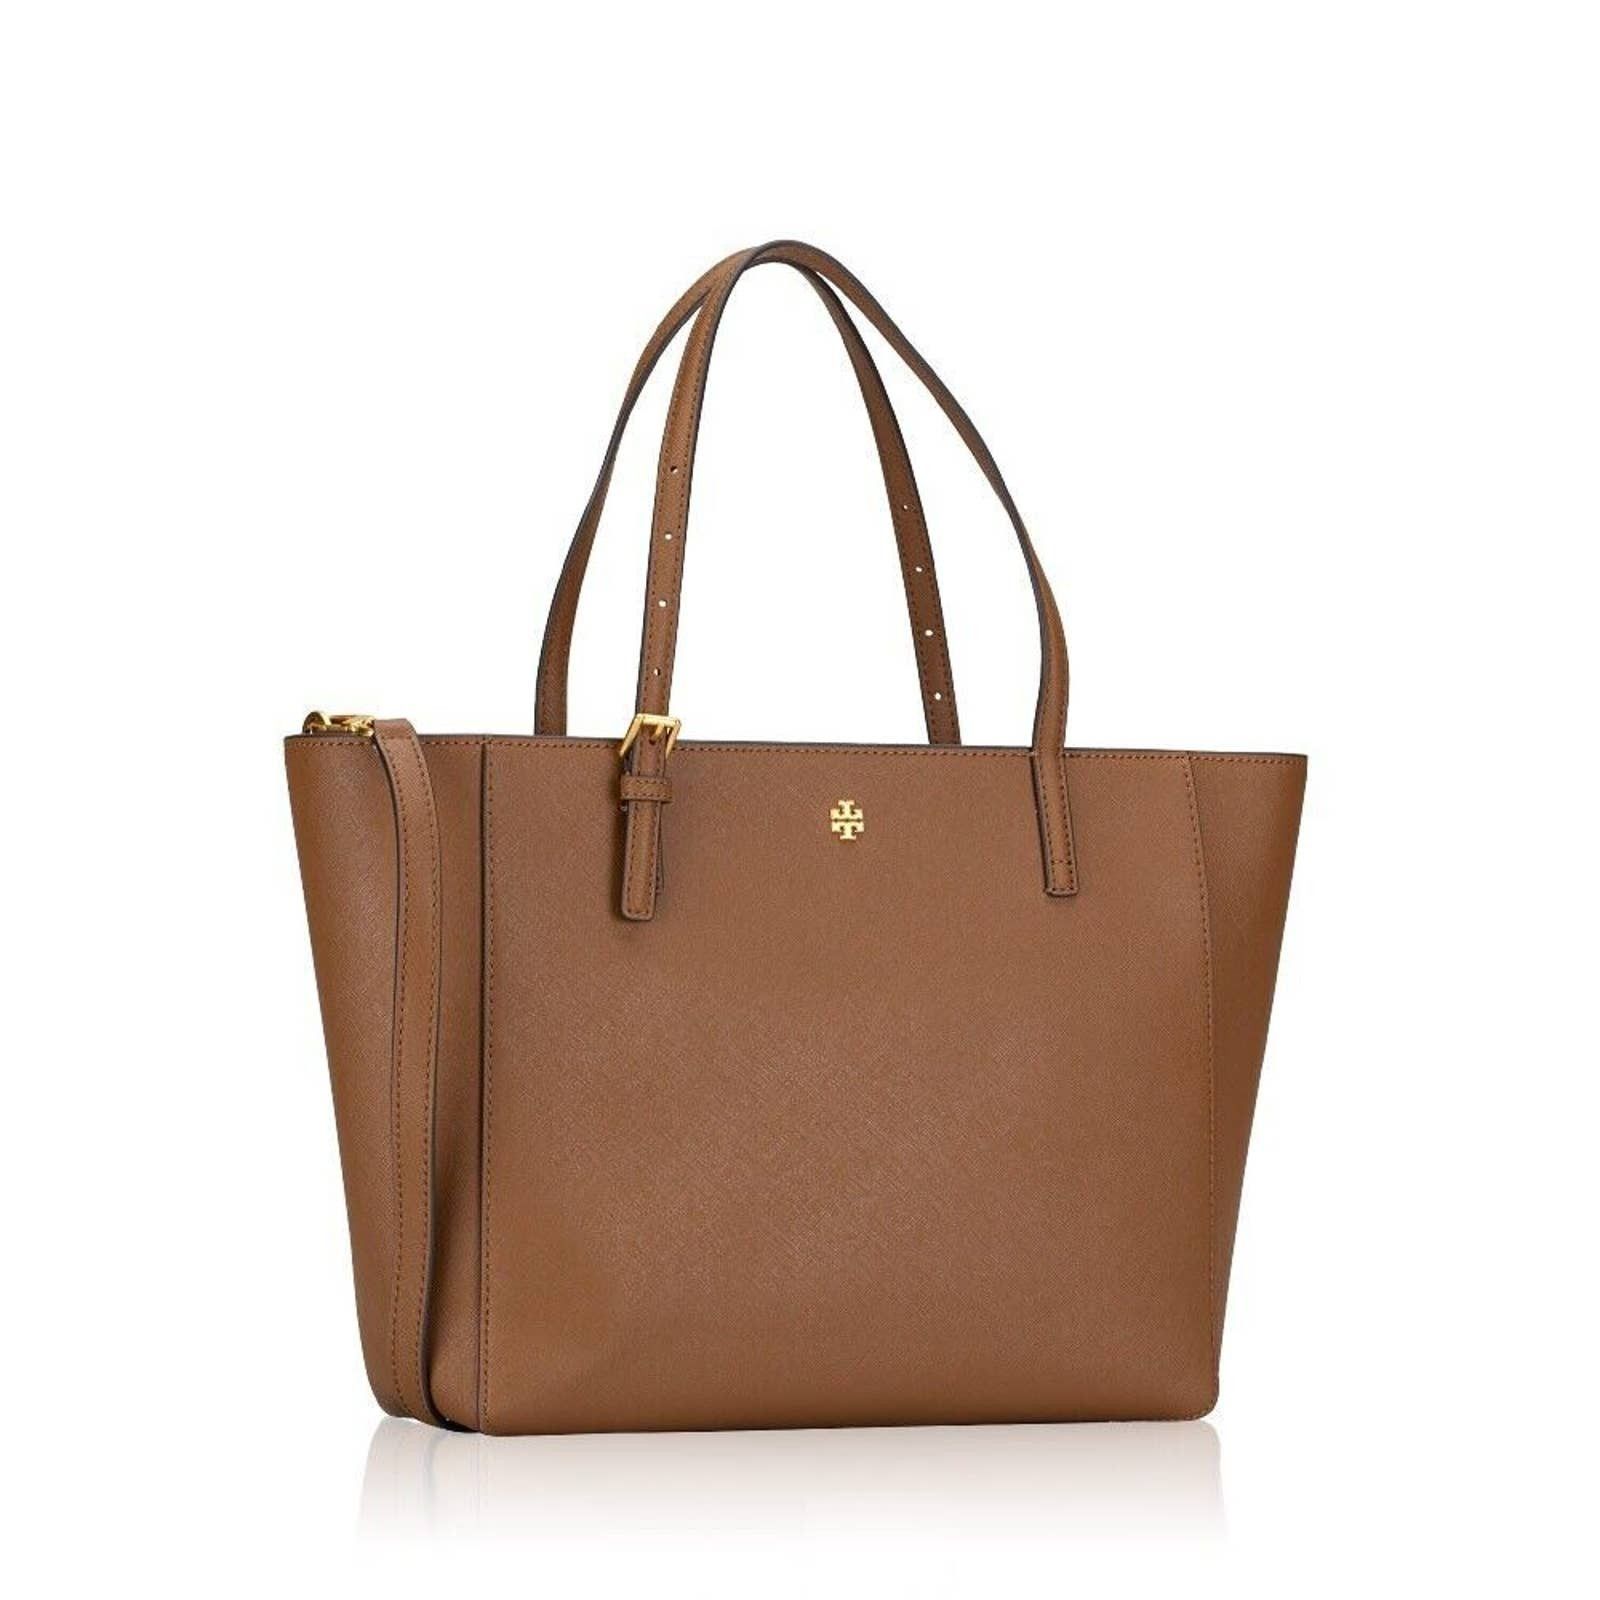 Tory Burch, Bags, Emerson Small Tote In The Color Moose